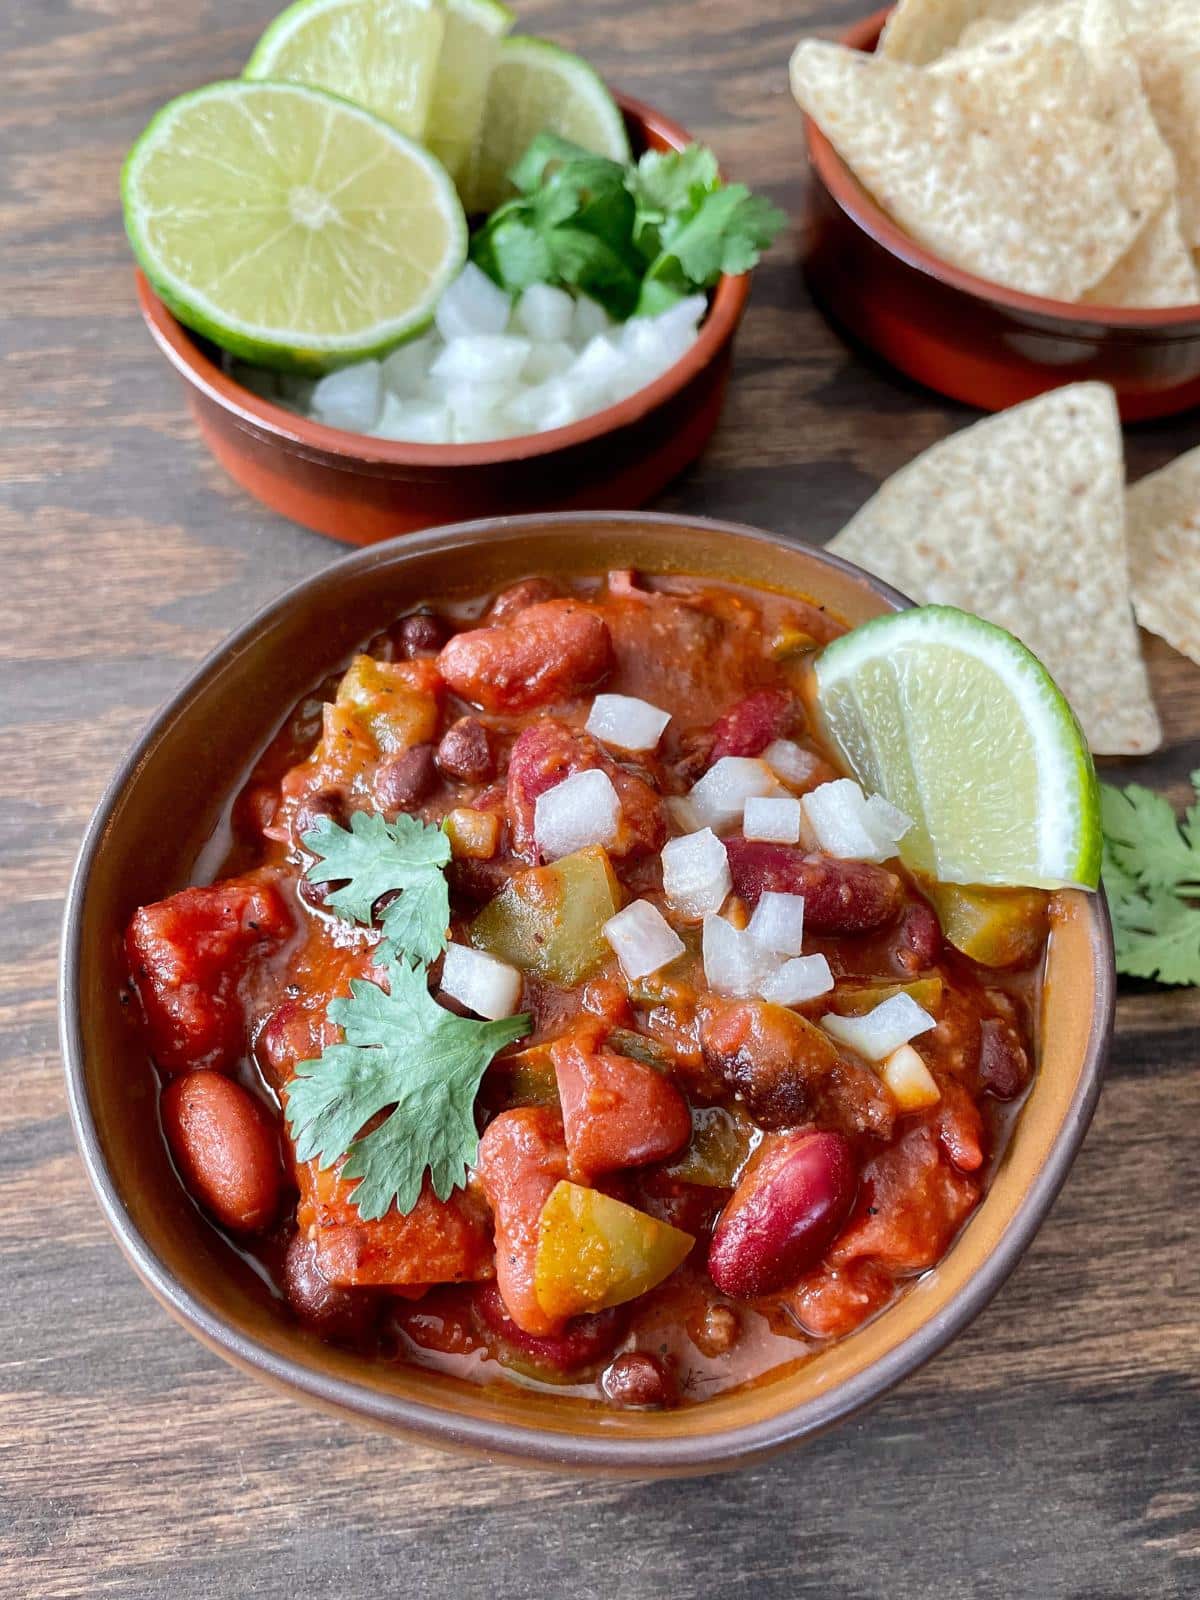 Chili made with beans and veggies.